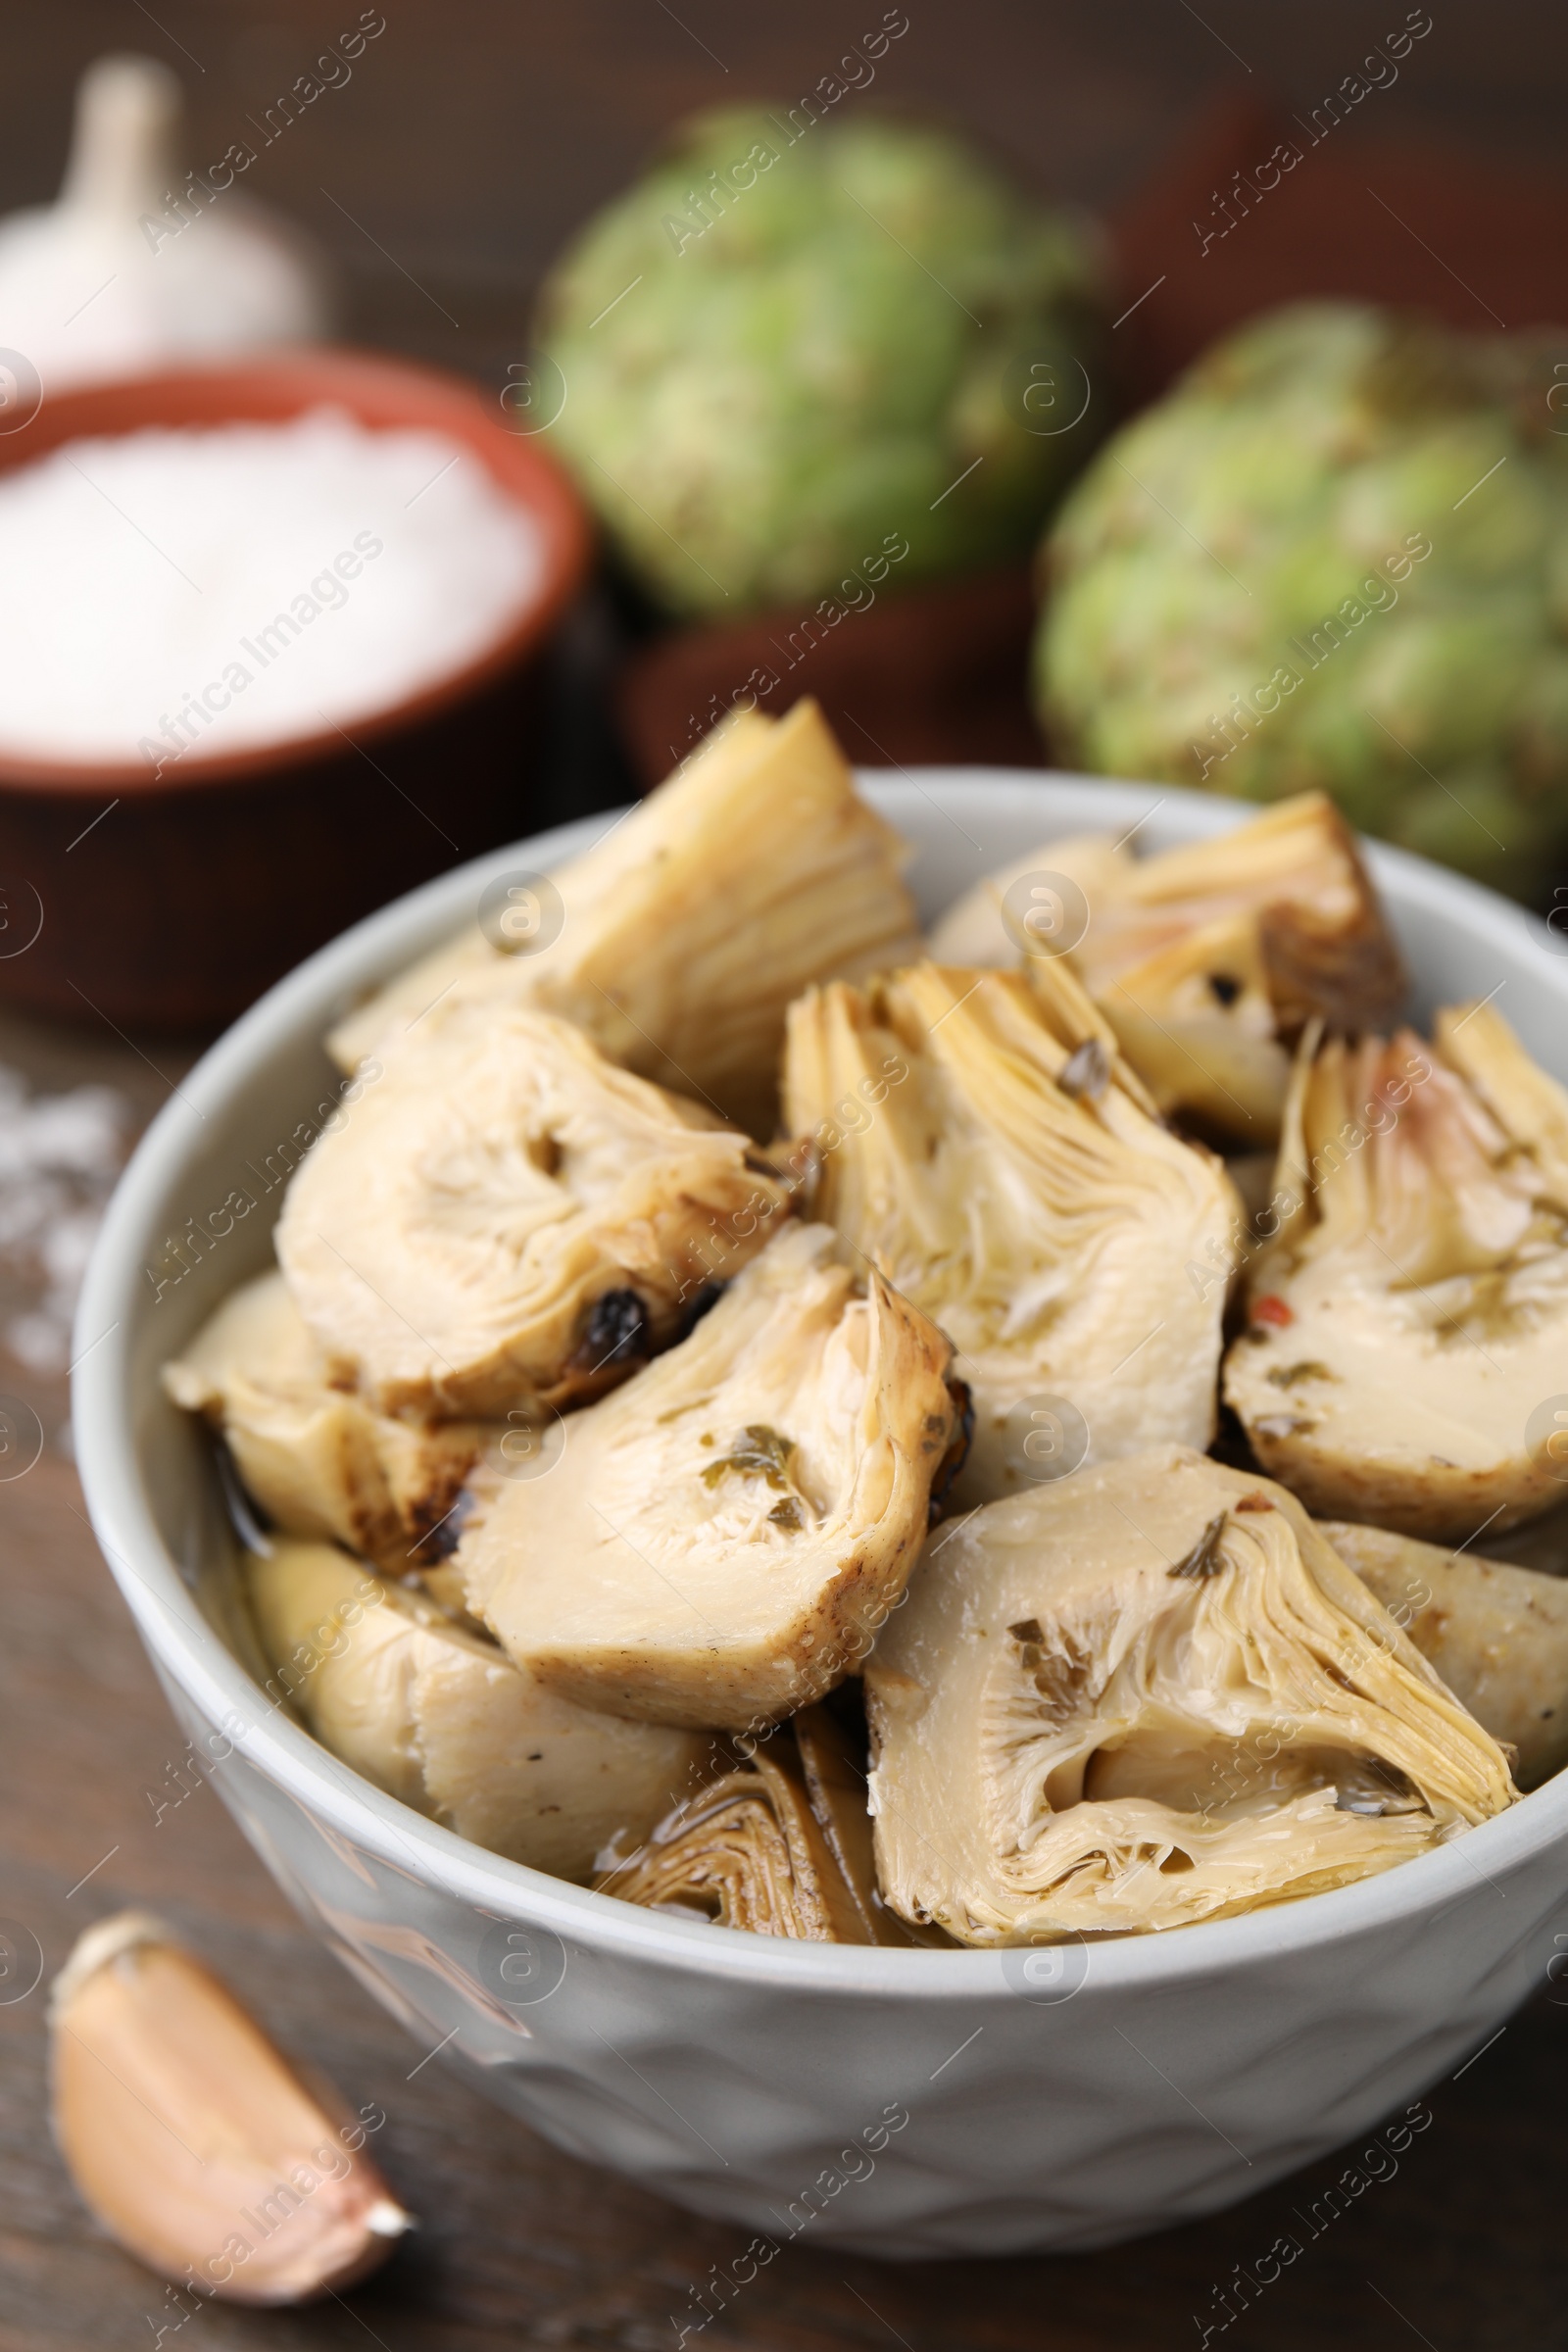 Photo of Bowl of pickled artichokes on wooden table, closeup